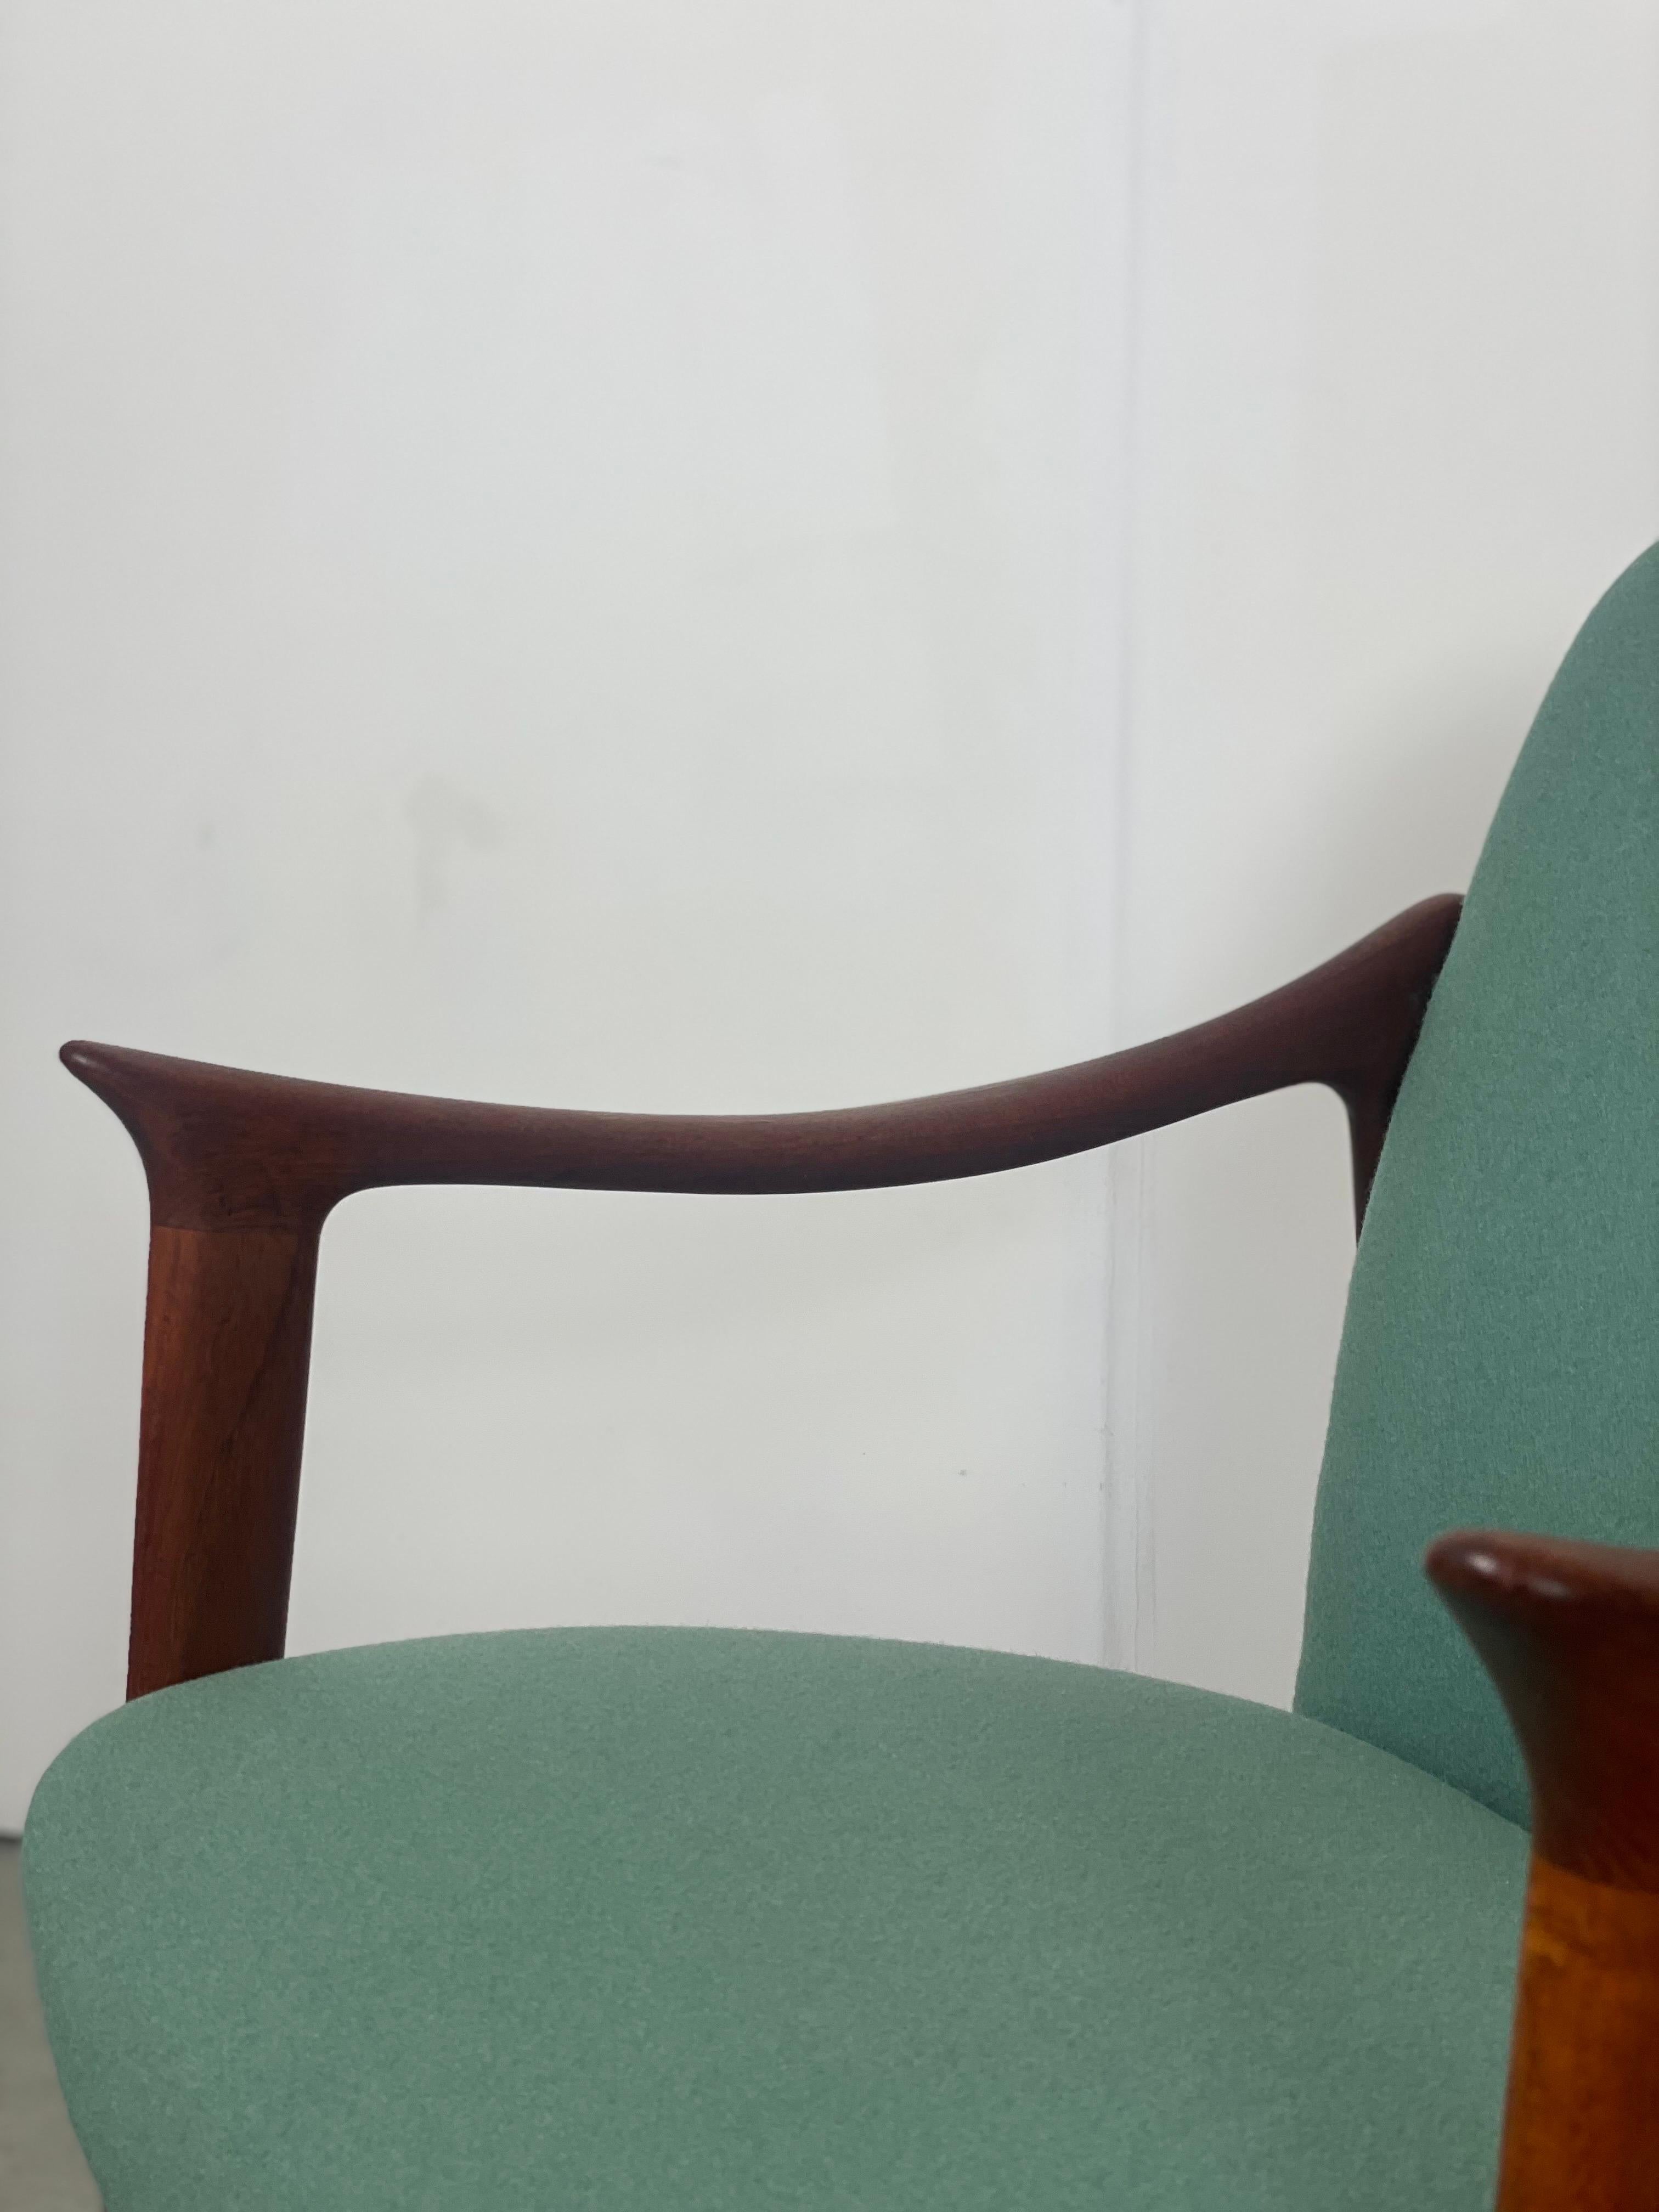 Nordic Teak Arm Chair by Fredrik A. Kayser, 1950s In Good Condition For Sale In St-Brais, JU